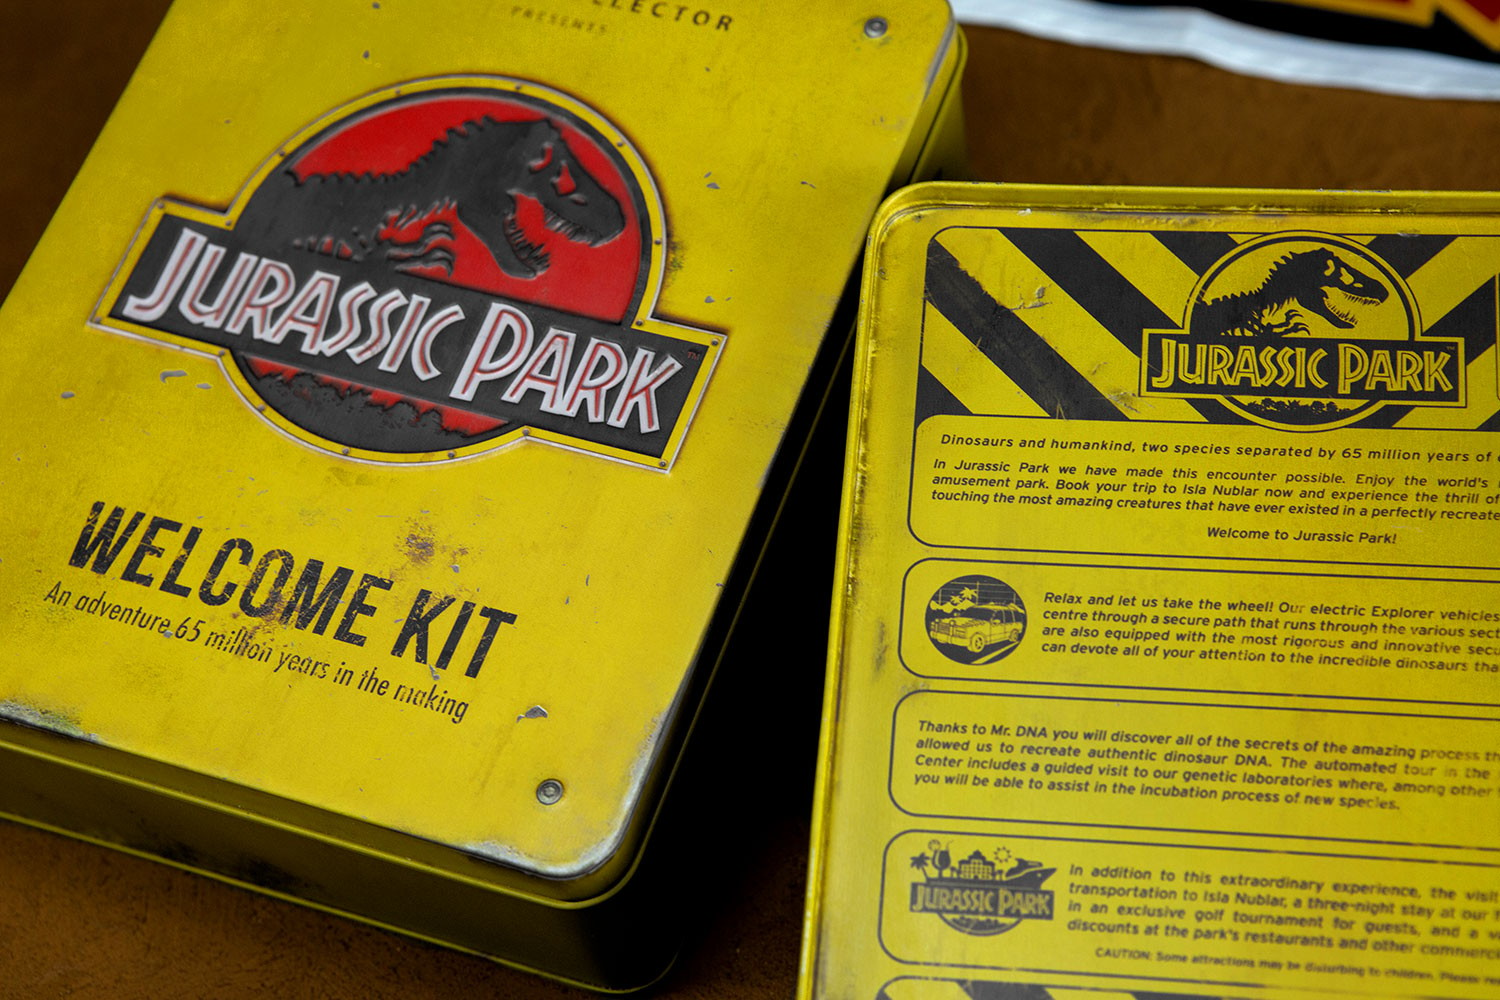 Jurassic Park Welcome Kit (Standard Edition) View 6